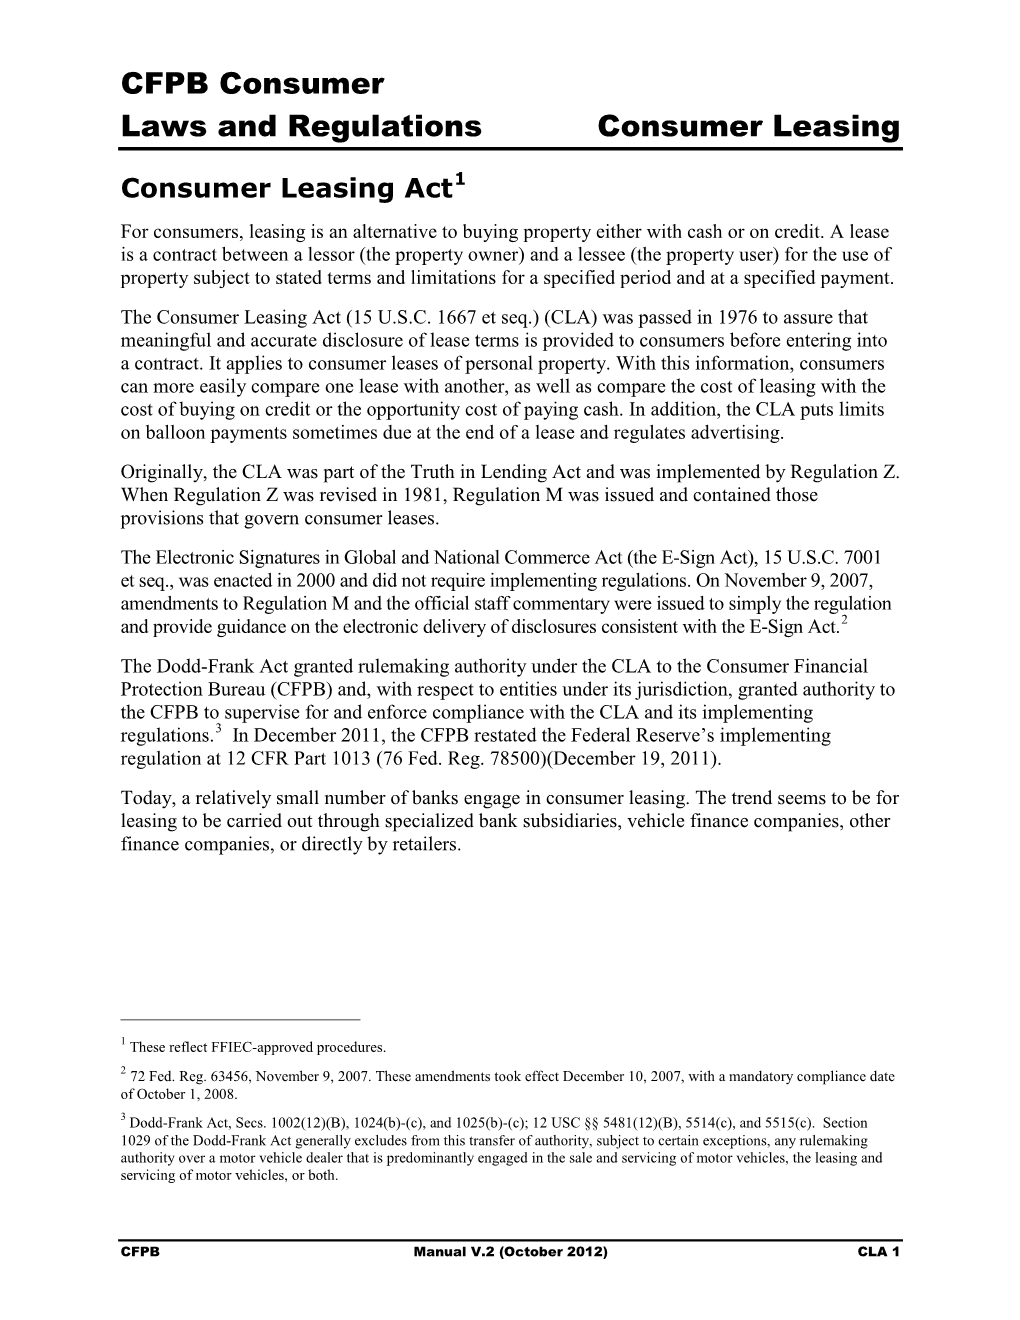 CFPB Consumer Laws and Regulations Consumer Leasing